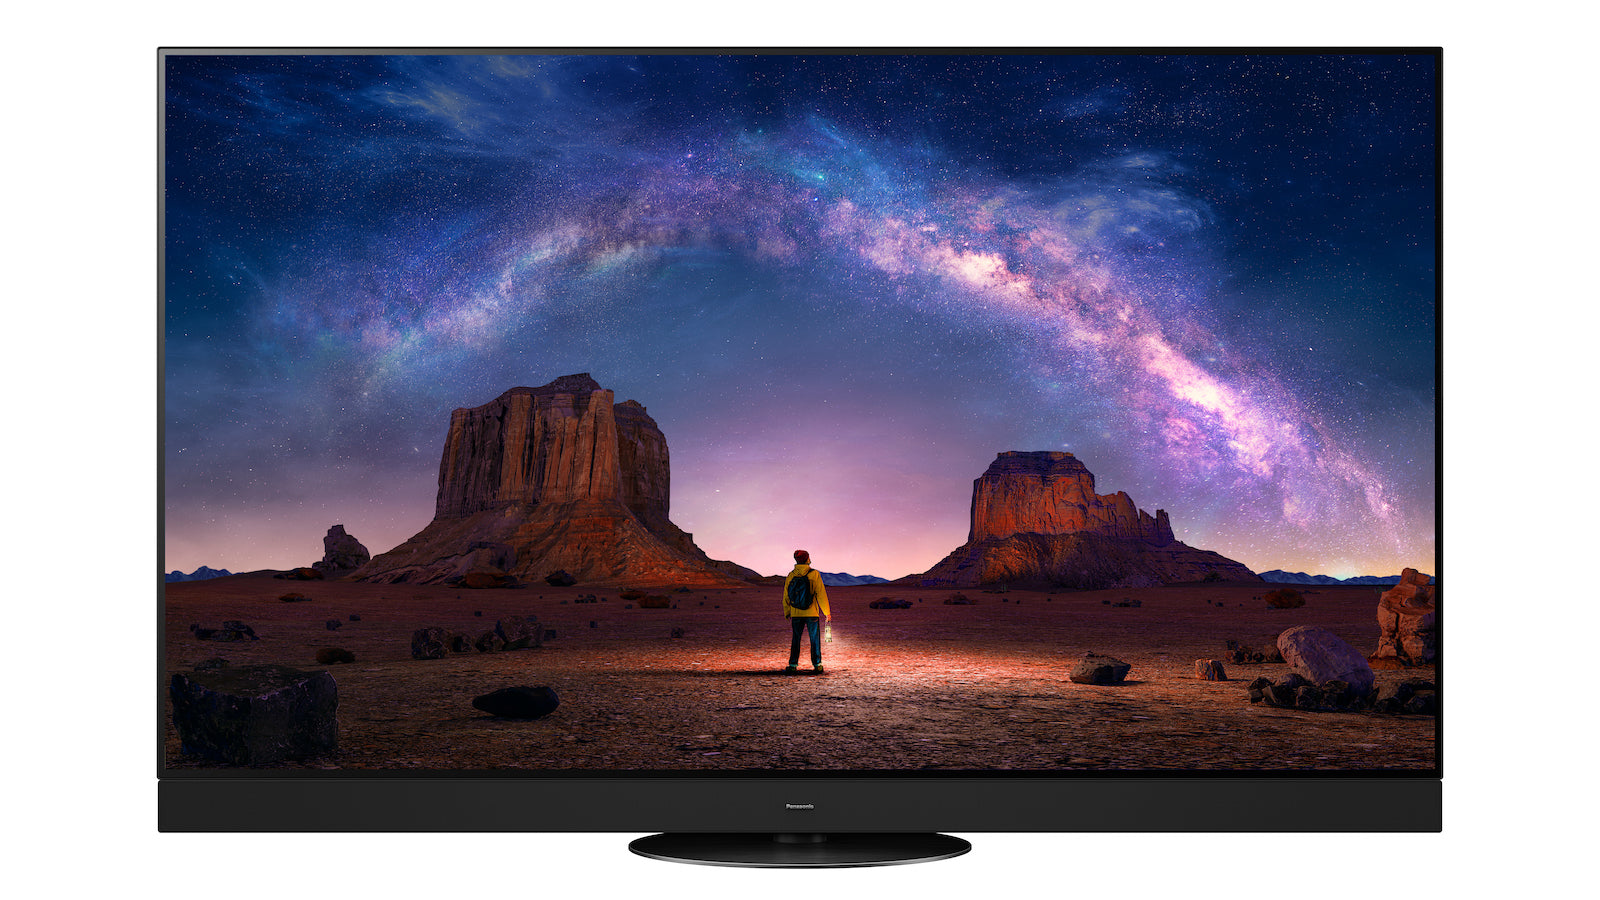 How to get the best from your Panasonic TV